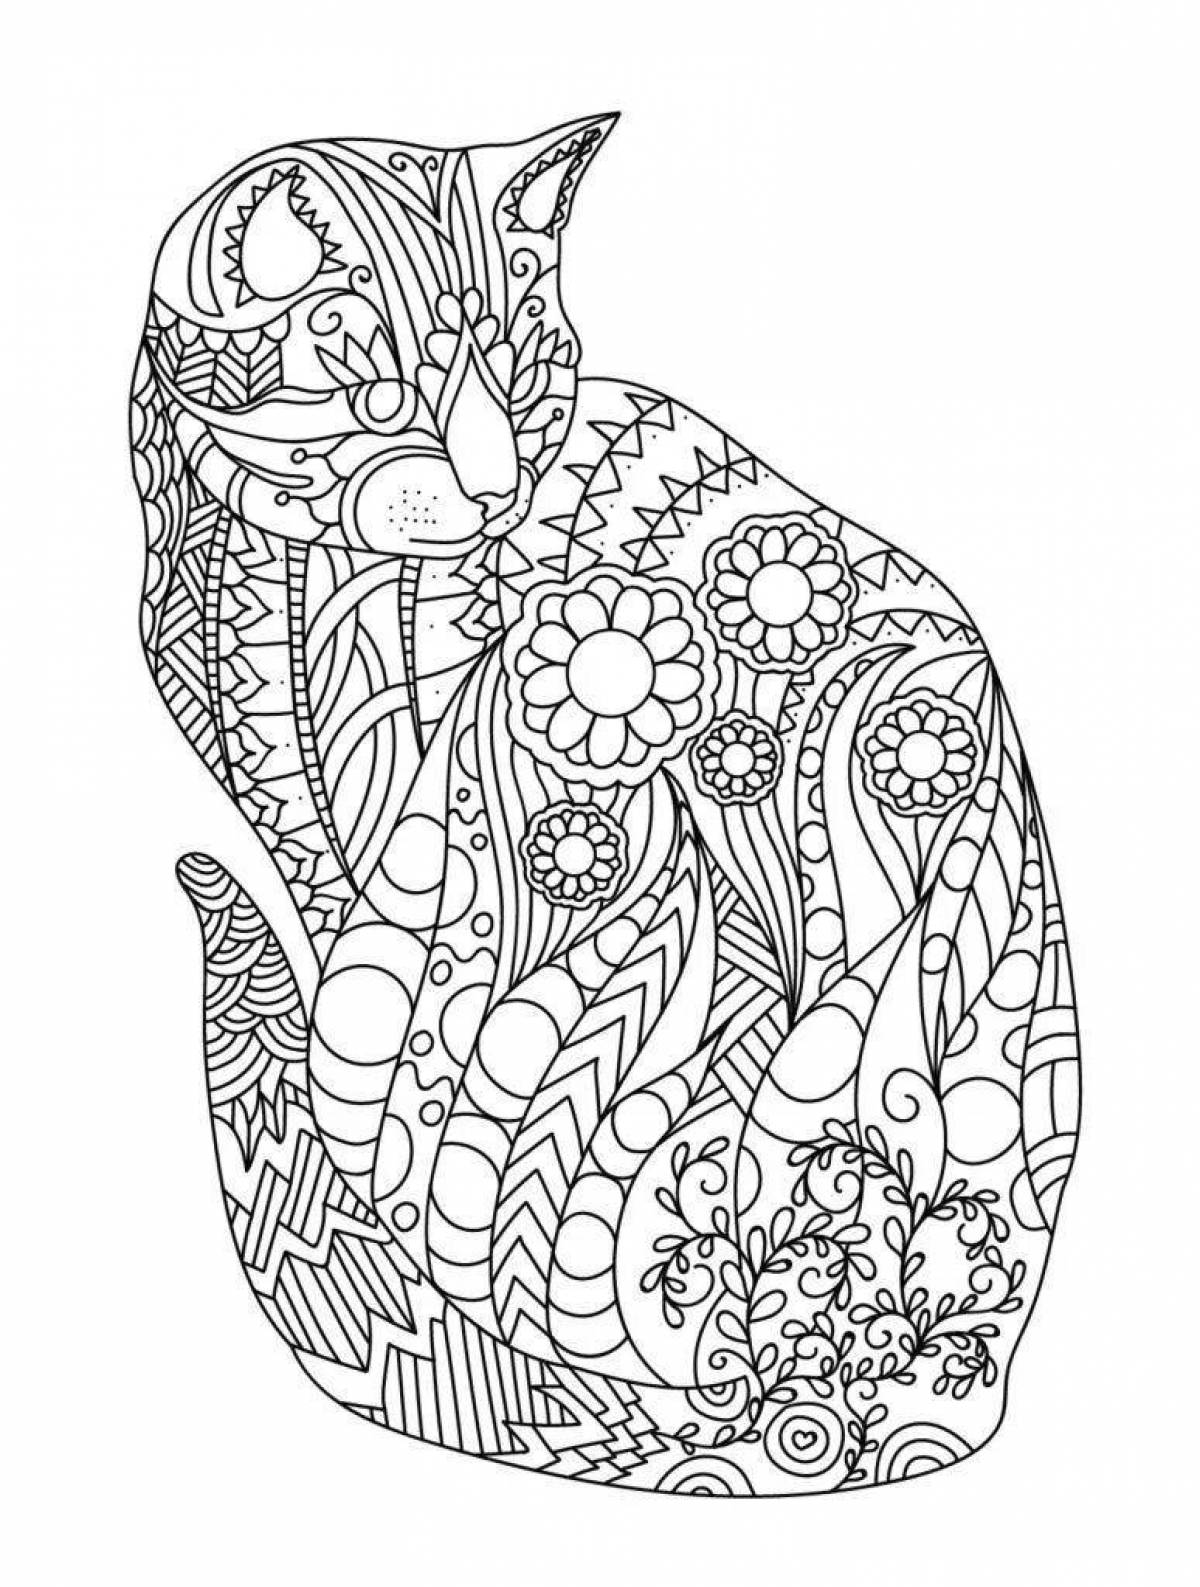 Attractive simple coloring book for adults